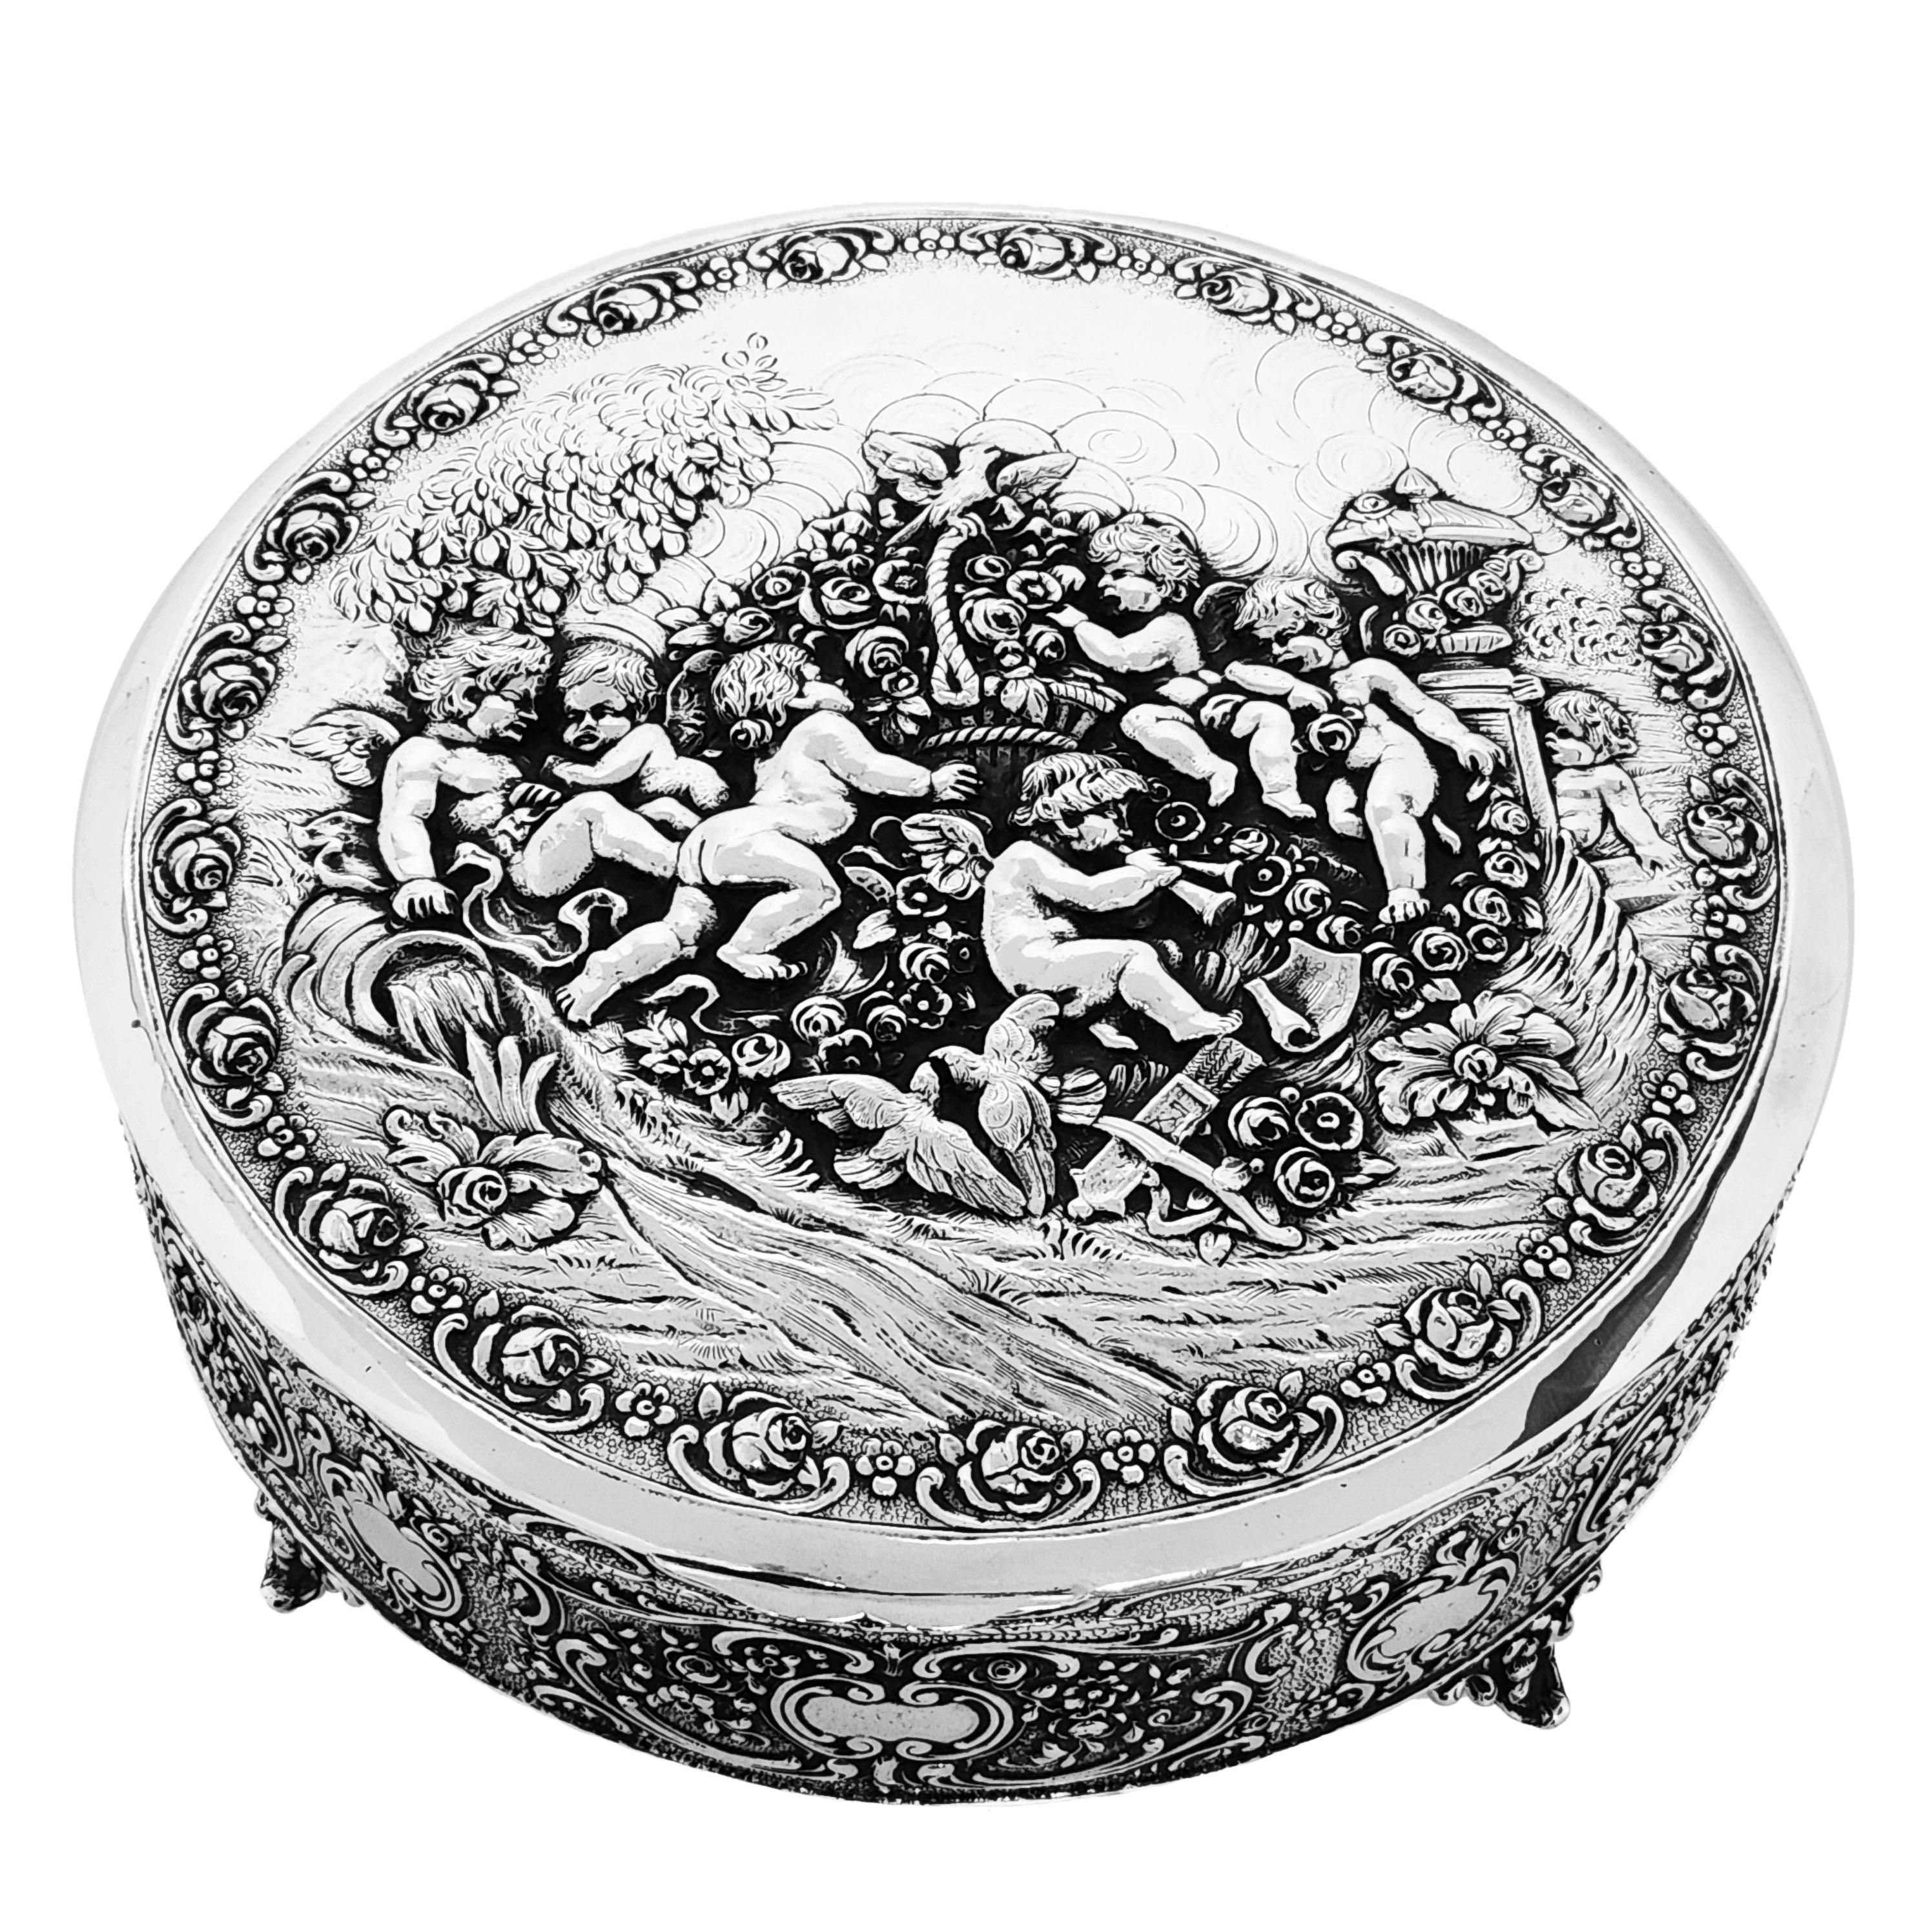 An impressive Antique Solid Silver Box with a round body and a fitted hinged lid. The Box is embellished on both the lid and sides with ornate and detailed chased designs. The Lid shows a group of cherubs or putti frolicking in a floral garden,